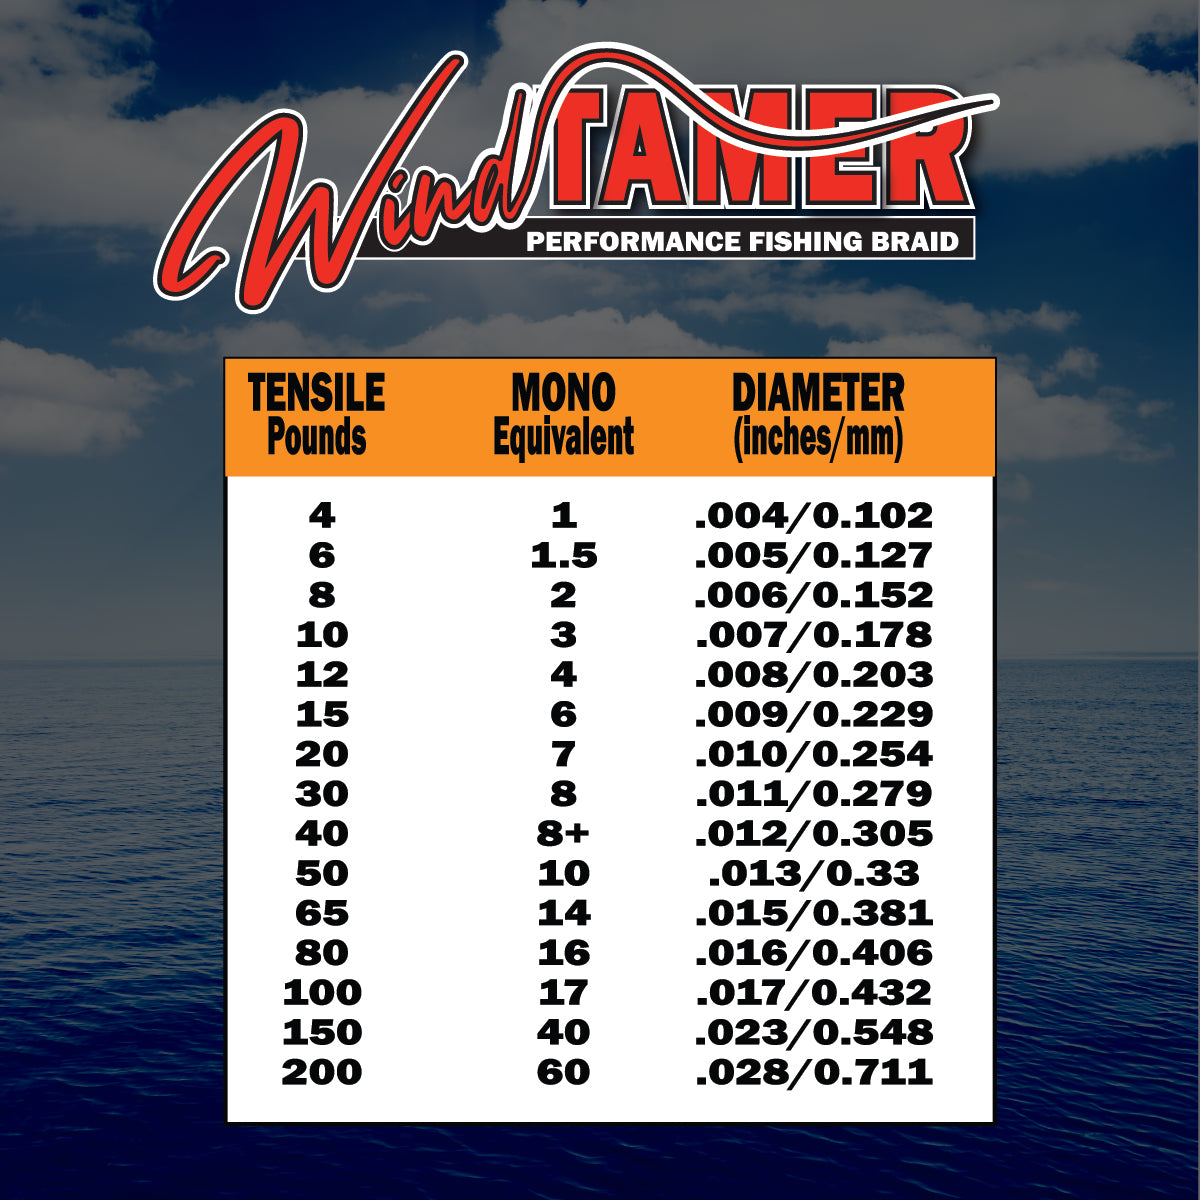 Tensile Mono Equivalent Diamter Chart  braided fishing line Windtamer by Fins